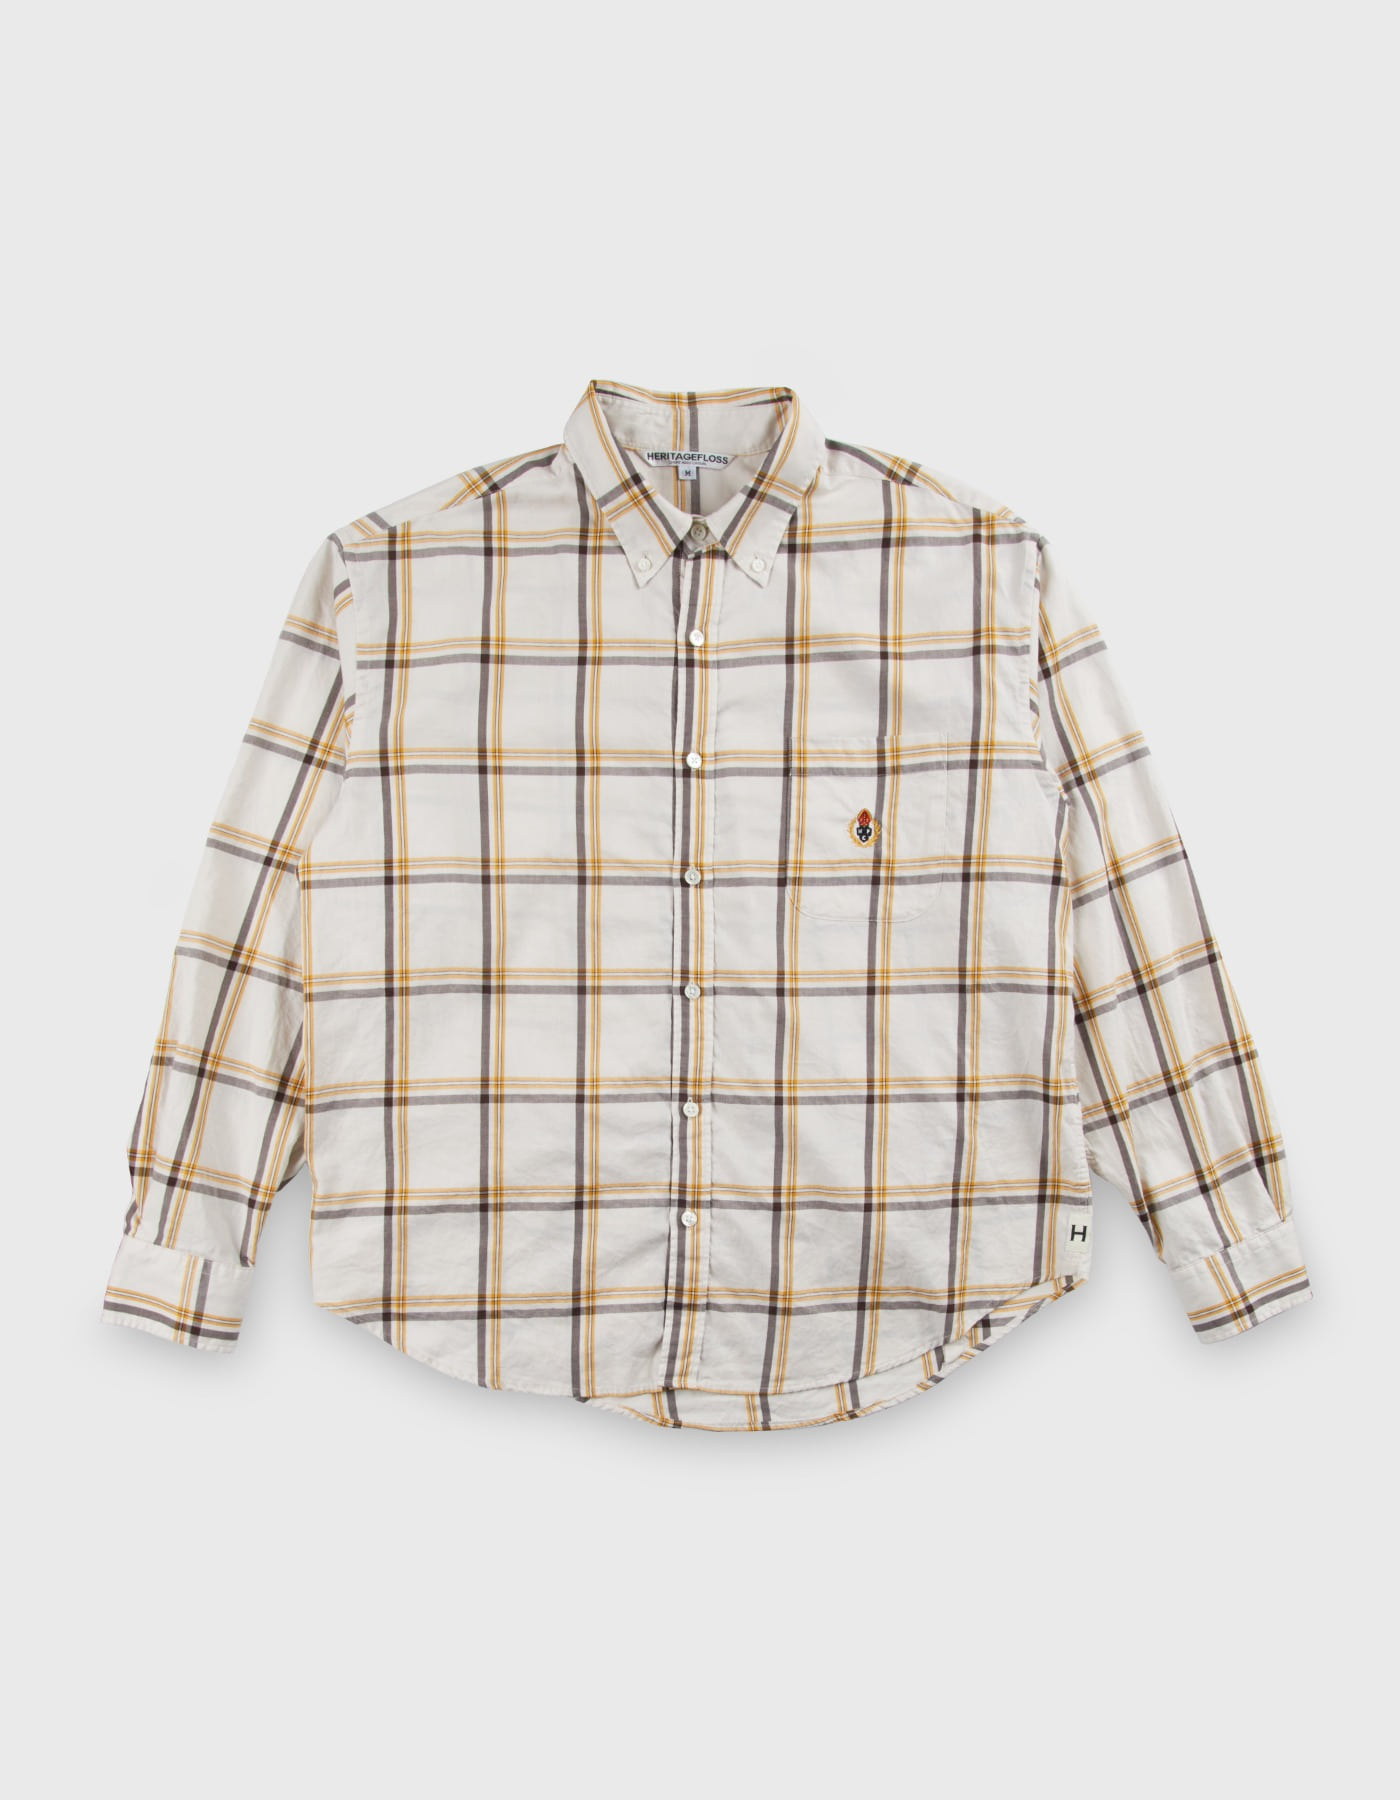 HFC CREST CHECKED SHIRT / Brown-Yellow Check